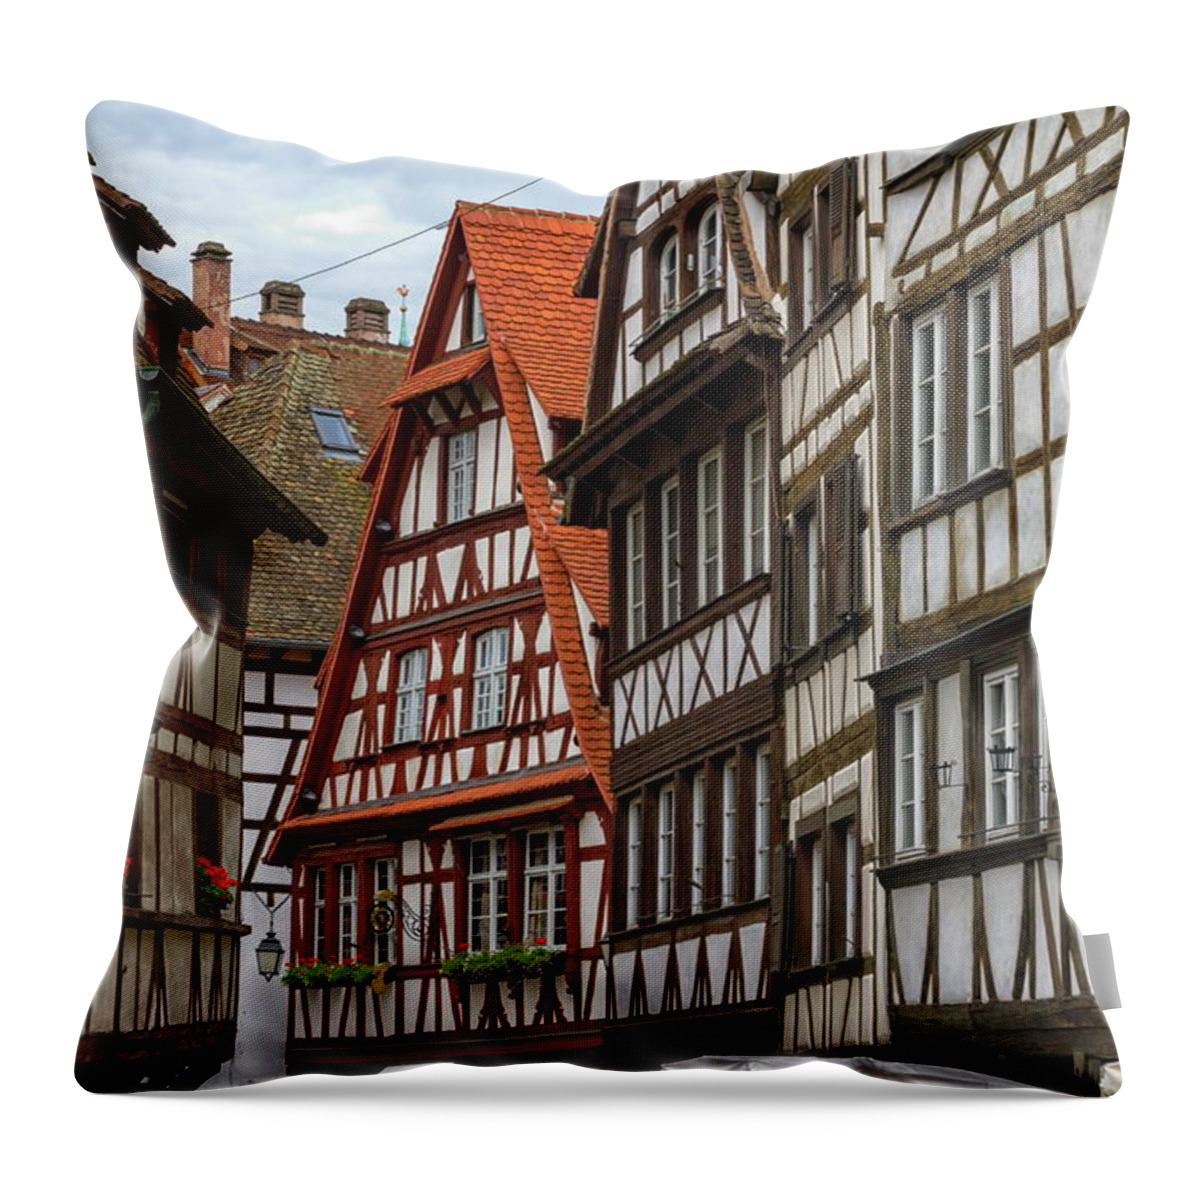 France Throw Pillow featuring the photograph Petite France houses, Strasbourg #2 by Elenarts - Elena Duvernay photo